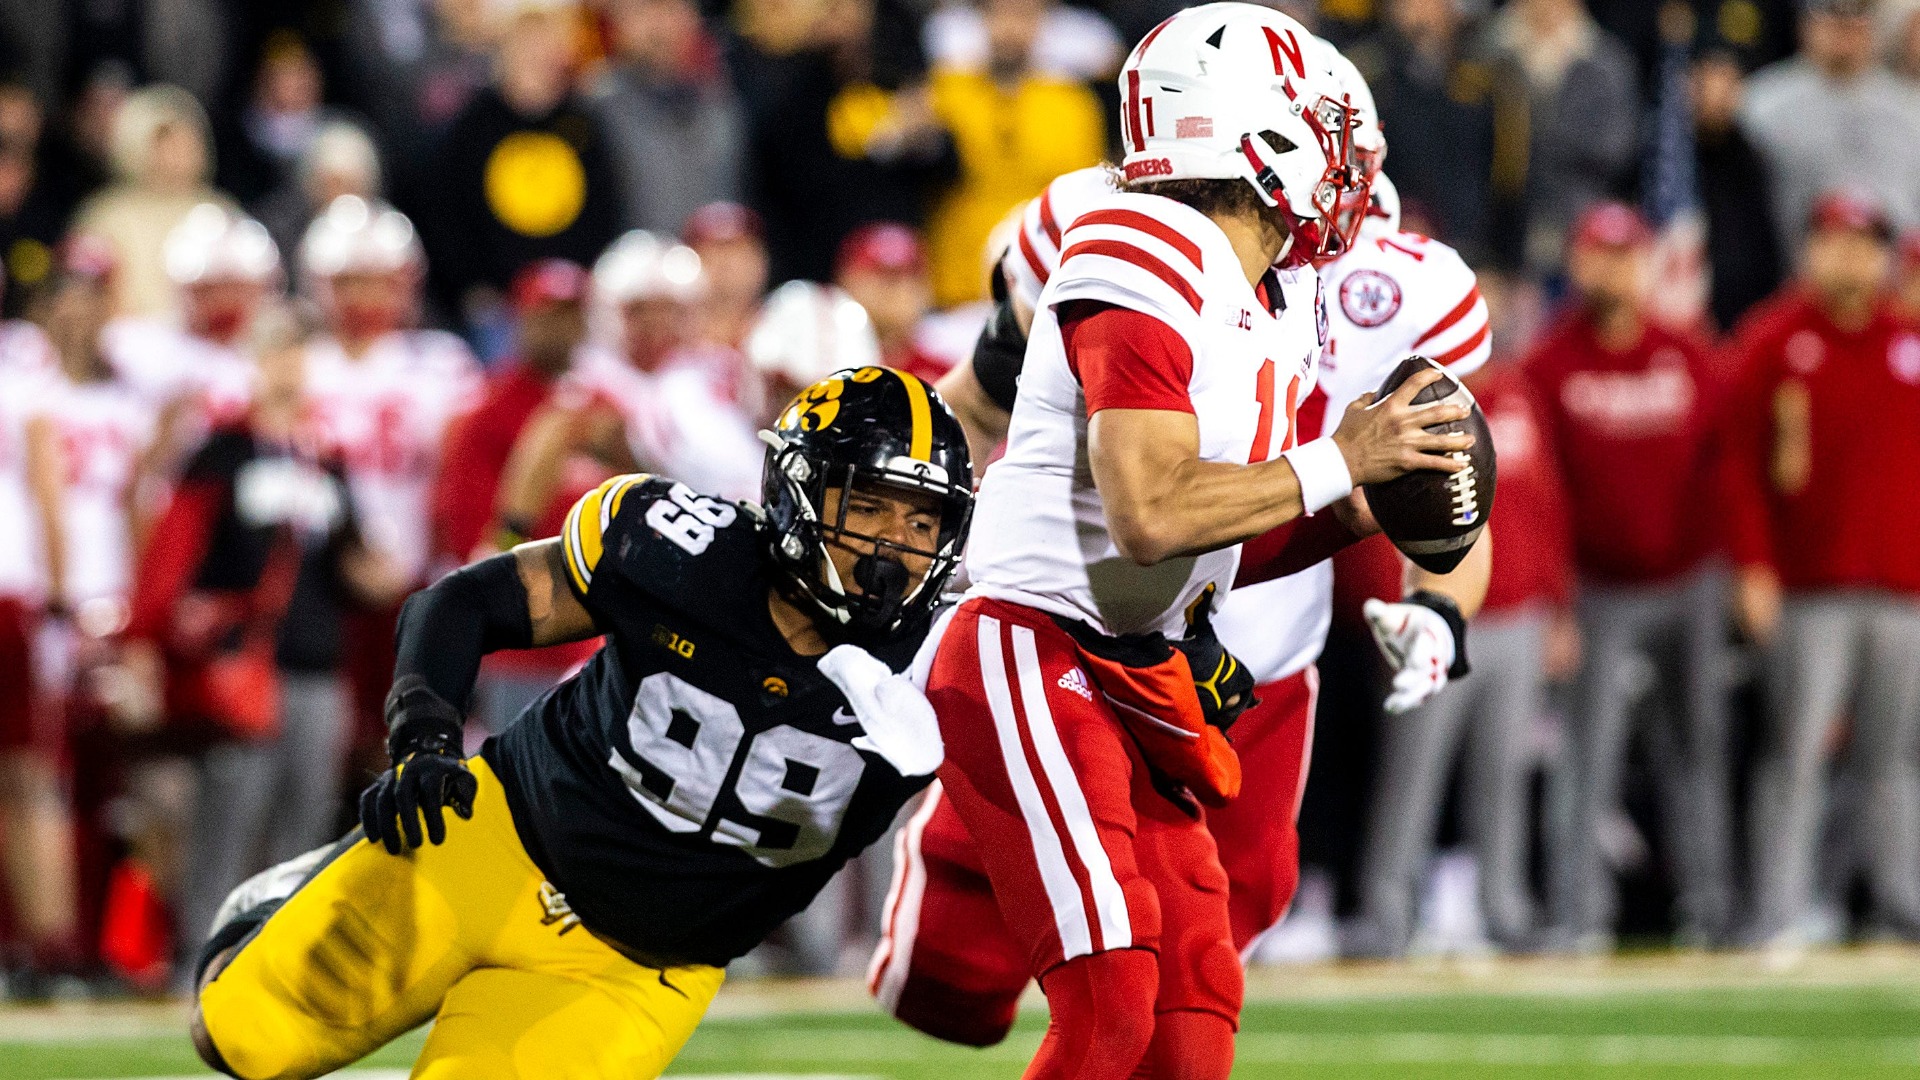 Iowa Star Suspended For College Football Season Due To Gambling